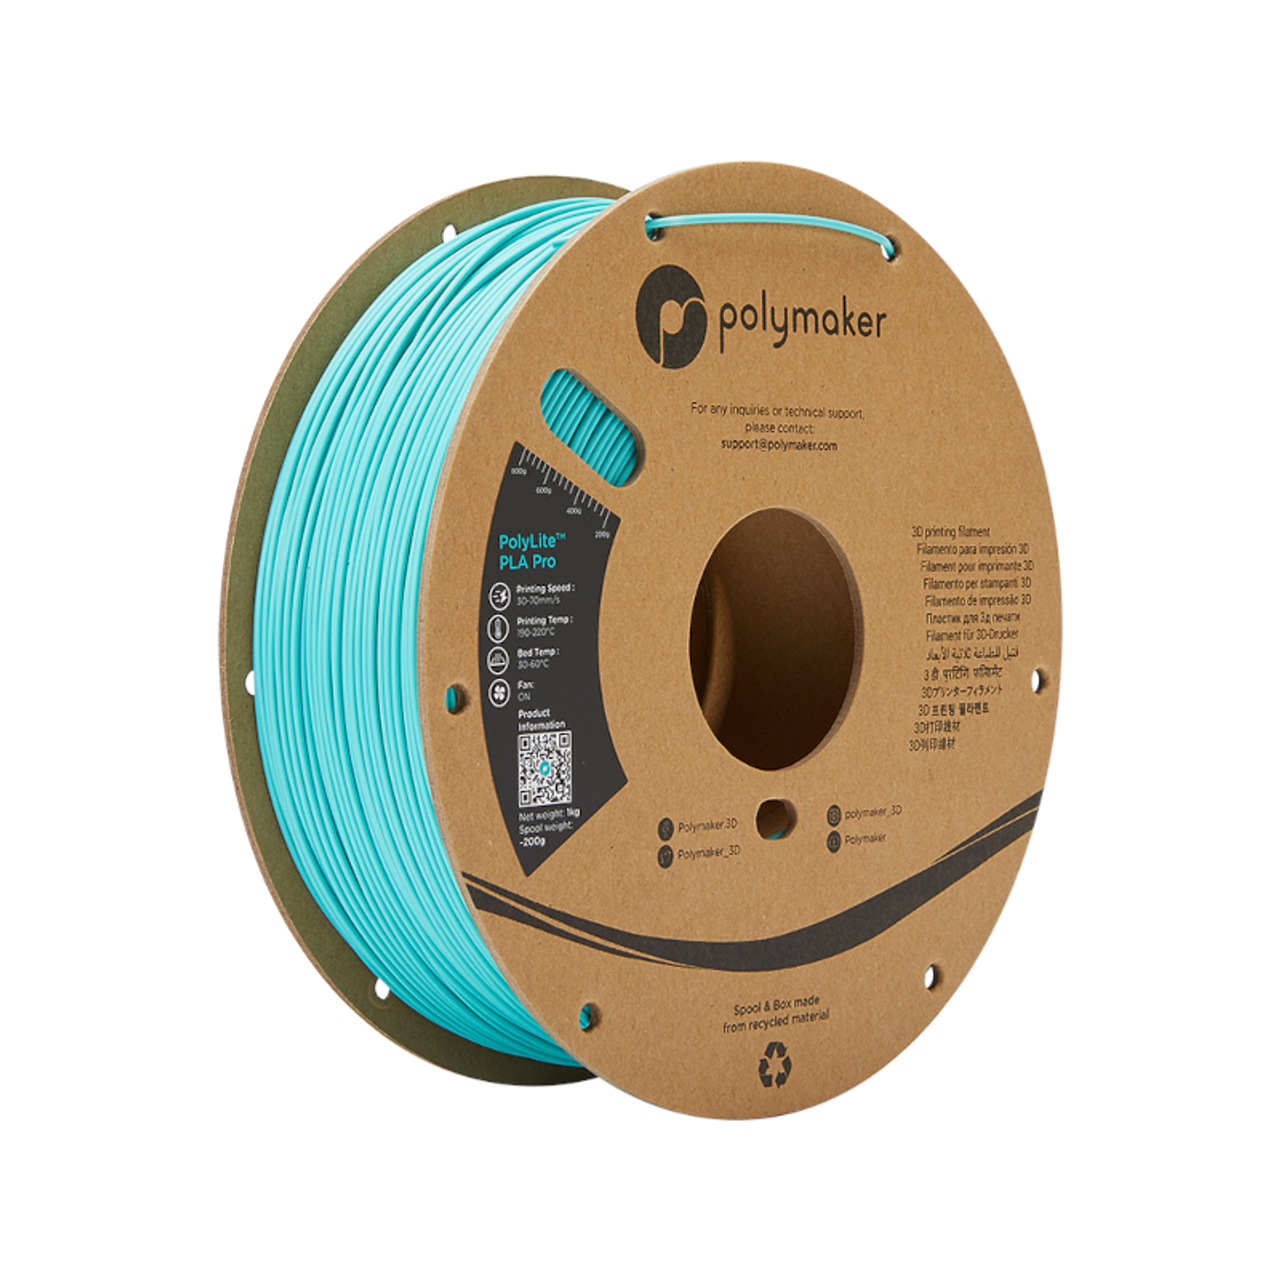 https://cdn11.bigcommerce.com/s-1vohxdh8gj/images/stencil/1280x1280/products/2414/8146/PolyLite_PLA_Pro_175_Polymaker_Teal_Spool_800x800__13003.1664986176.png?c=2?imbypass=on